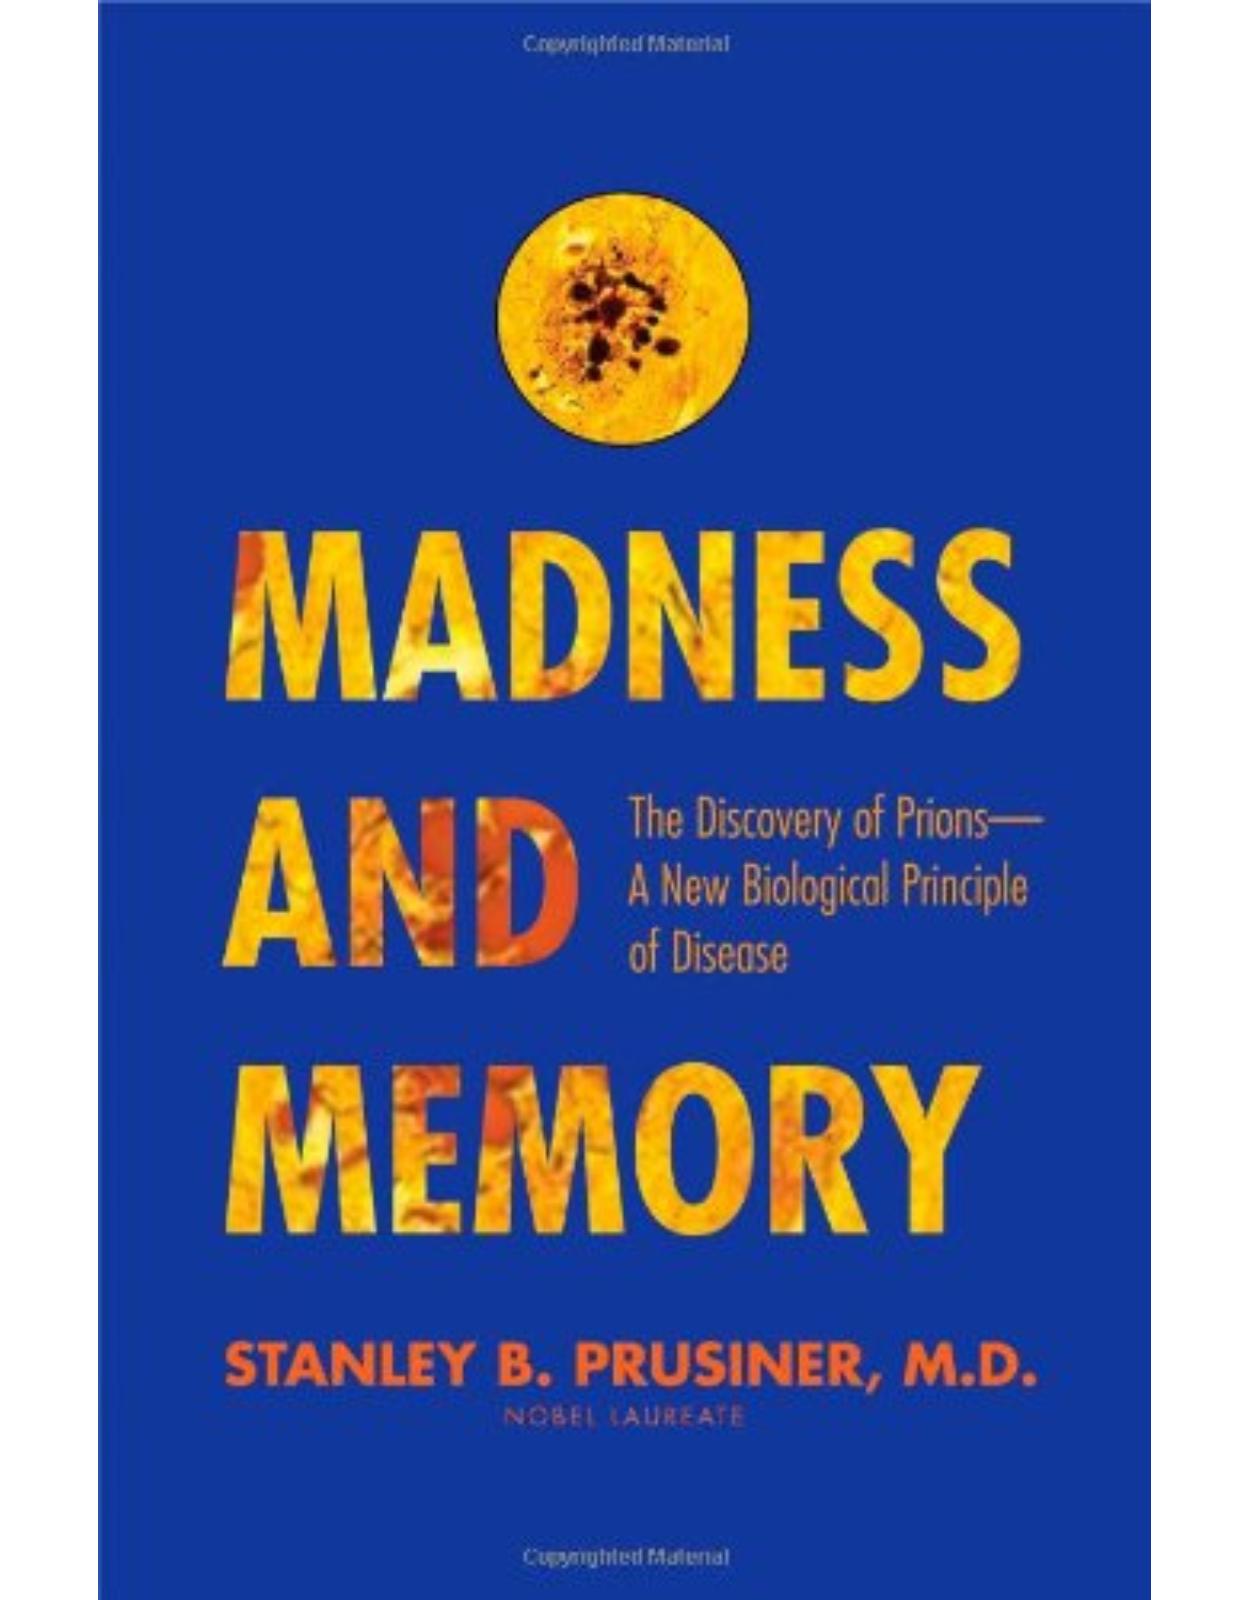 Madness and Memory. The Discovery of Prions - A New Biological Principle of Disease